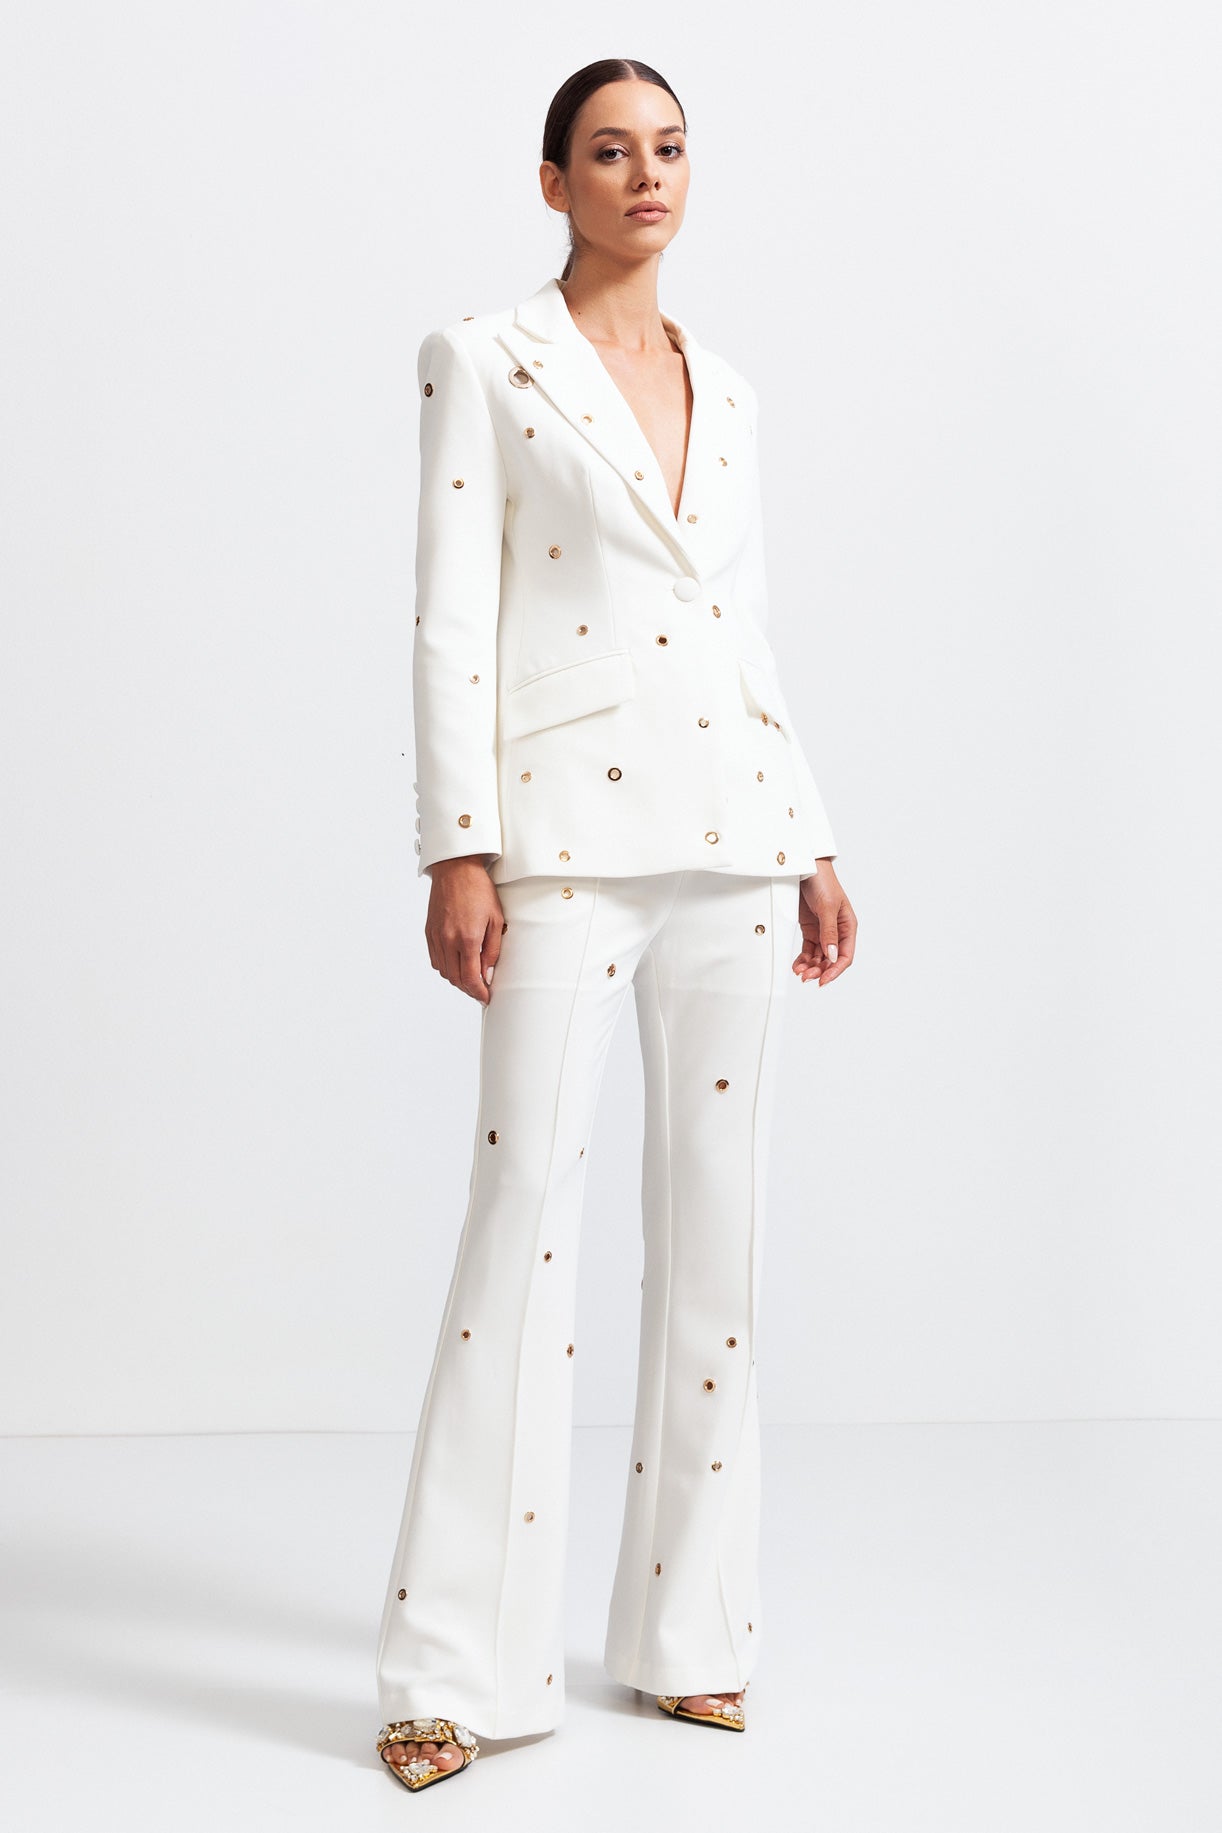 Two Piece Elegant Suit with Metal Details - White